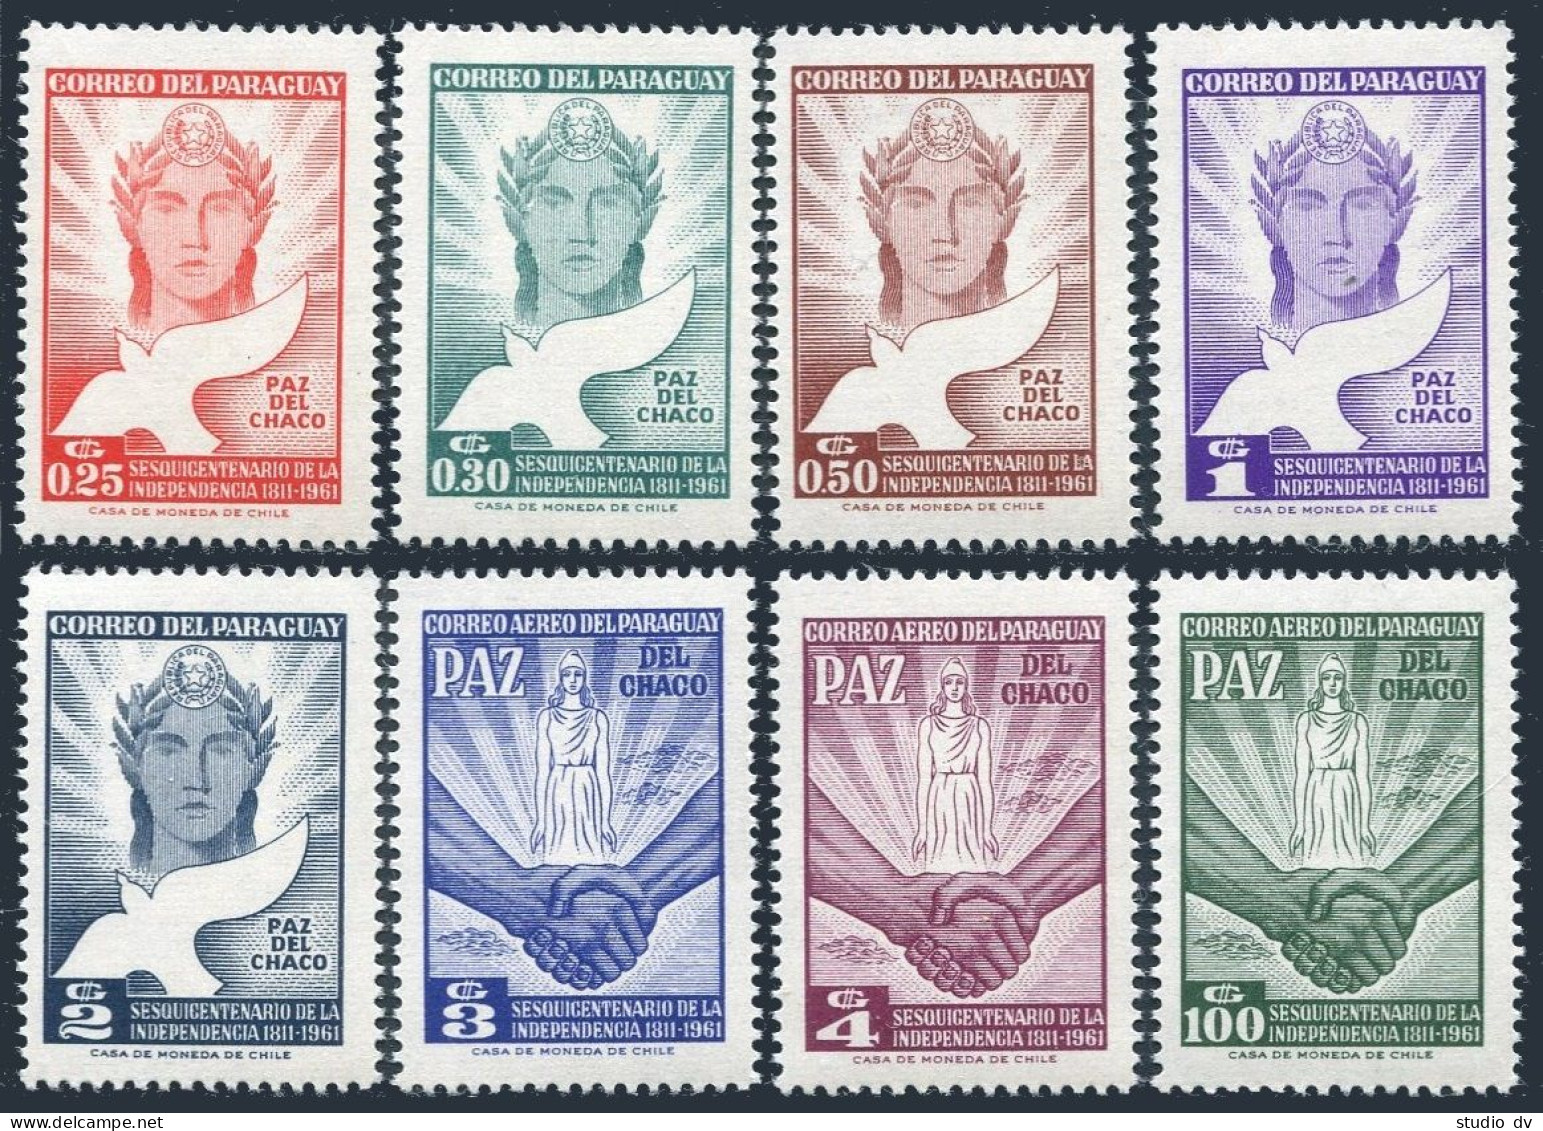 Paraguay 589-593, C288-C290, MNH. Chaco Peace. Independence, 150th Ann. 1961. - Paraguay